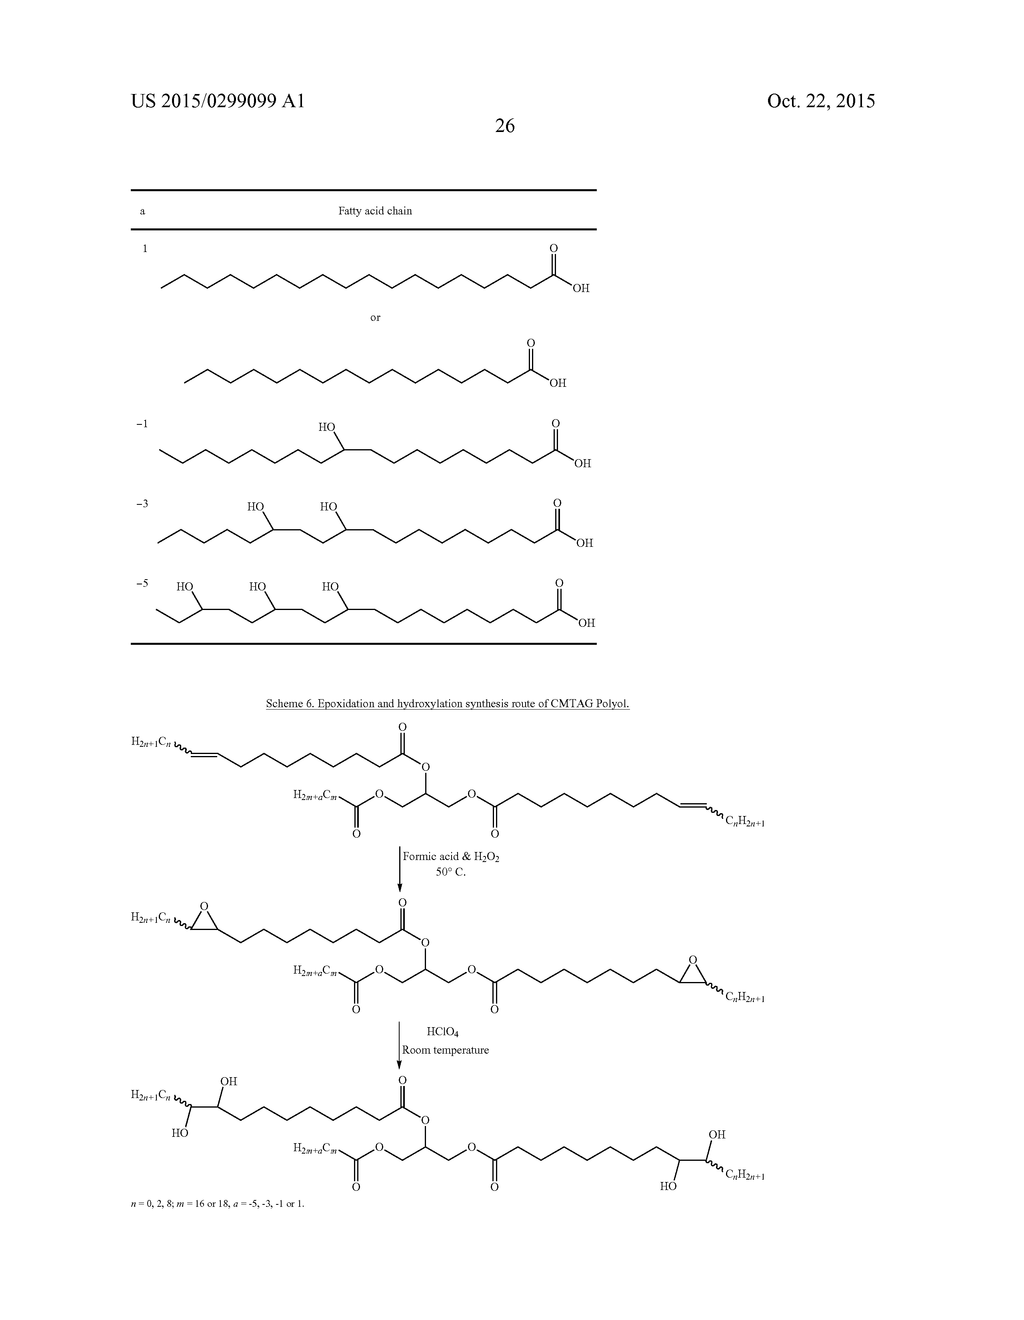 CERTAIN METATHESIZED NATURAL OIL TRIACYLGLYCEROL POLYOLS FOR USE IN     POLYURETHANE APPLICATIONS AND THEIR RELATED PROPERTIES - diagram, schematic, and image 57